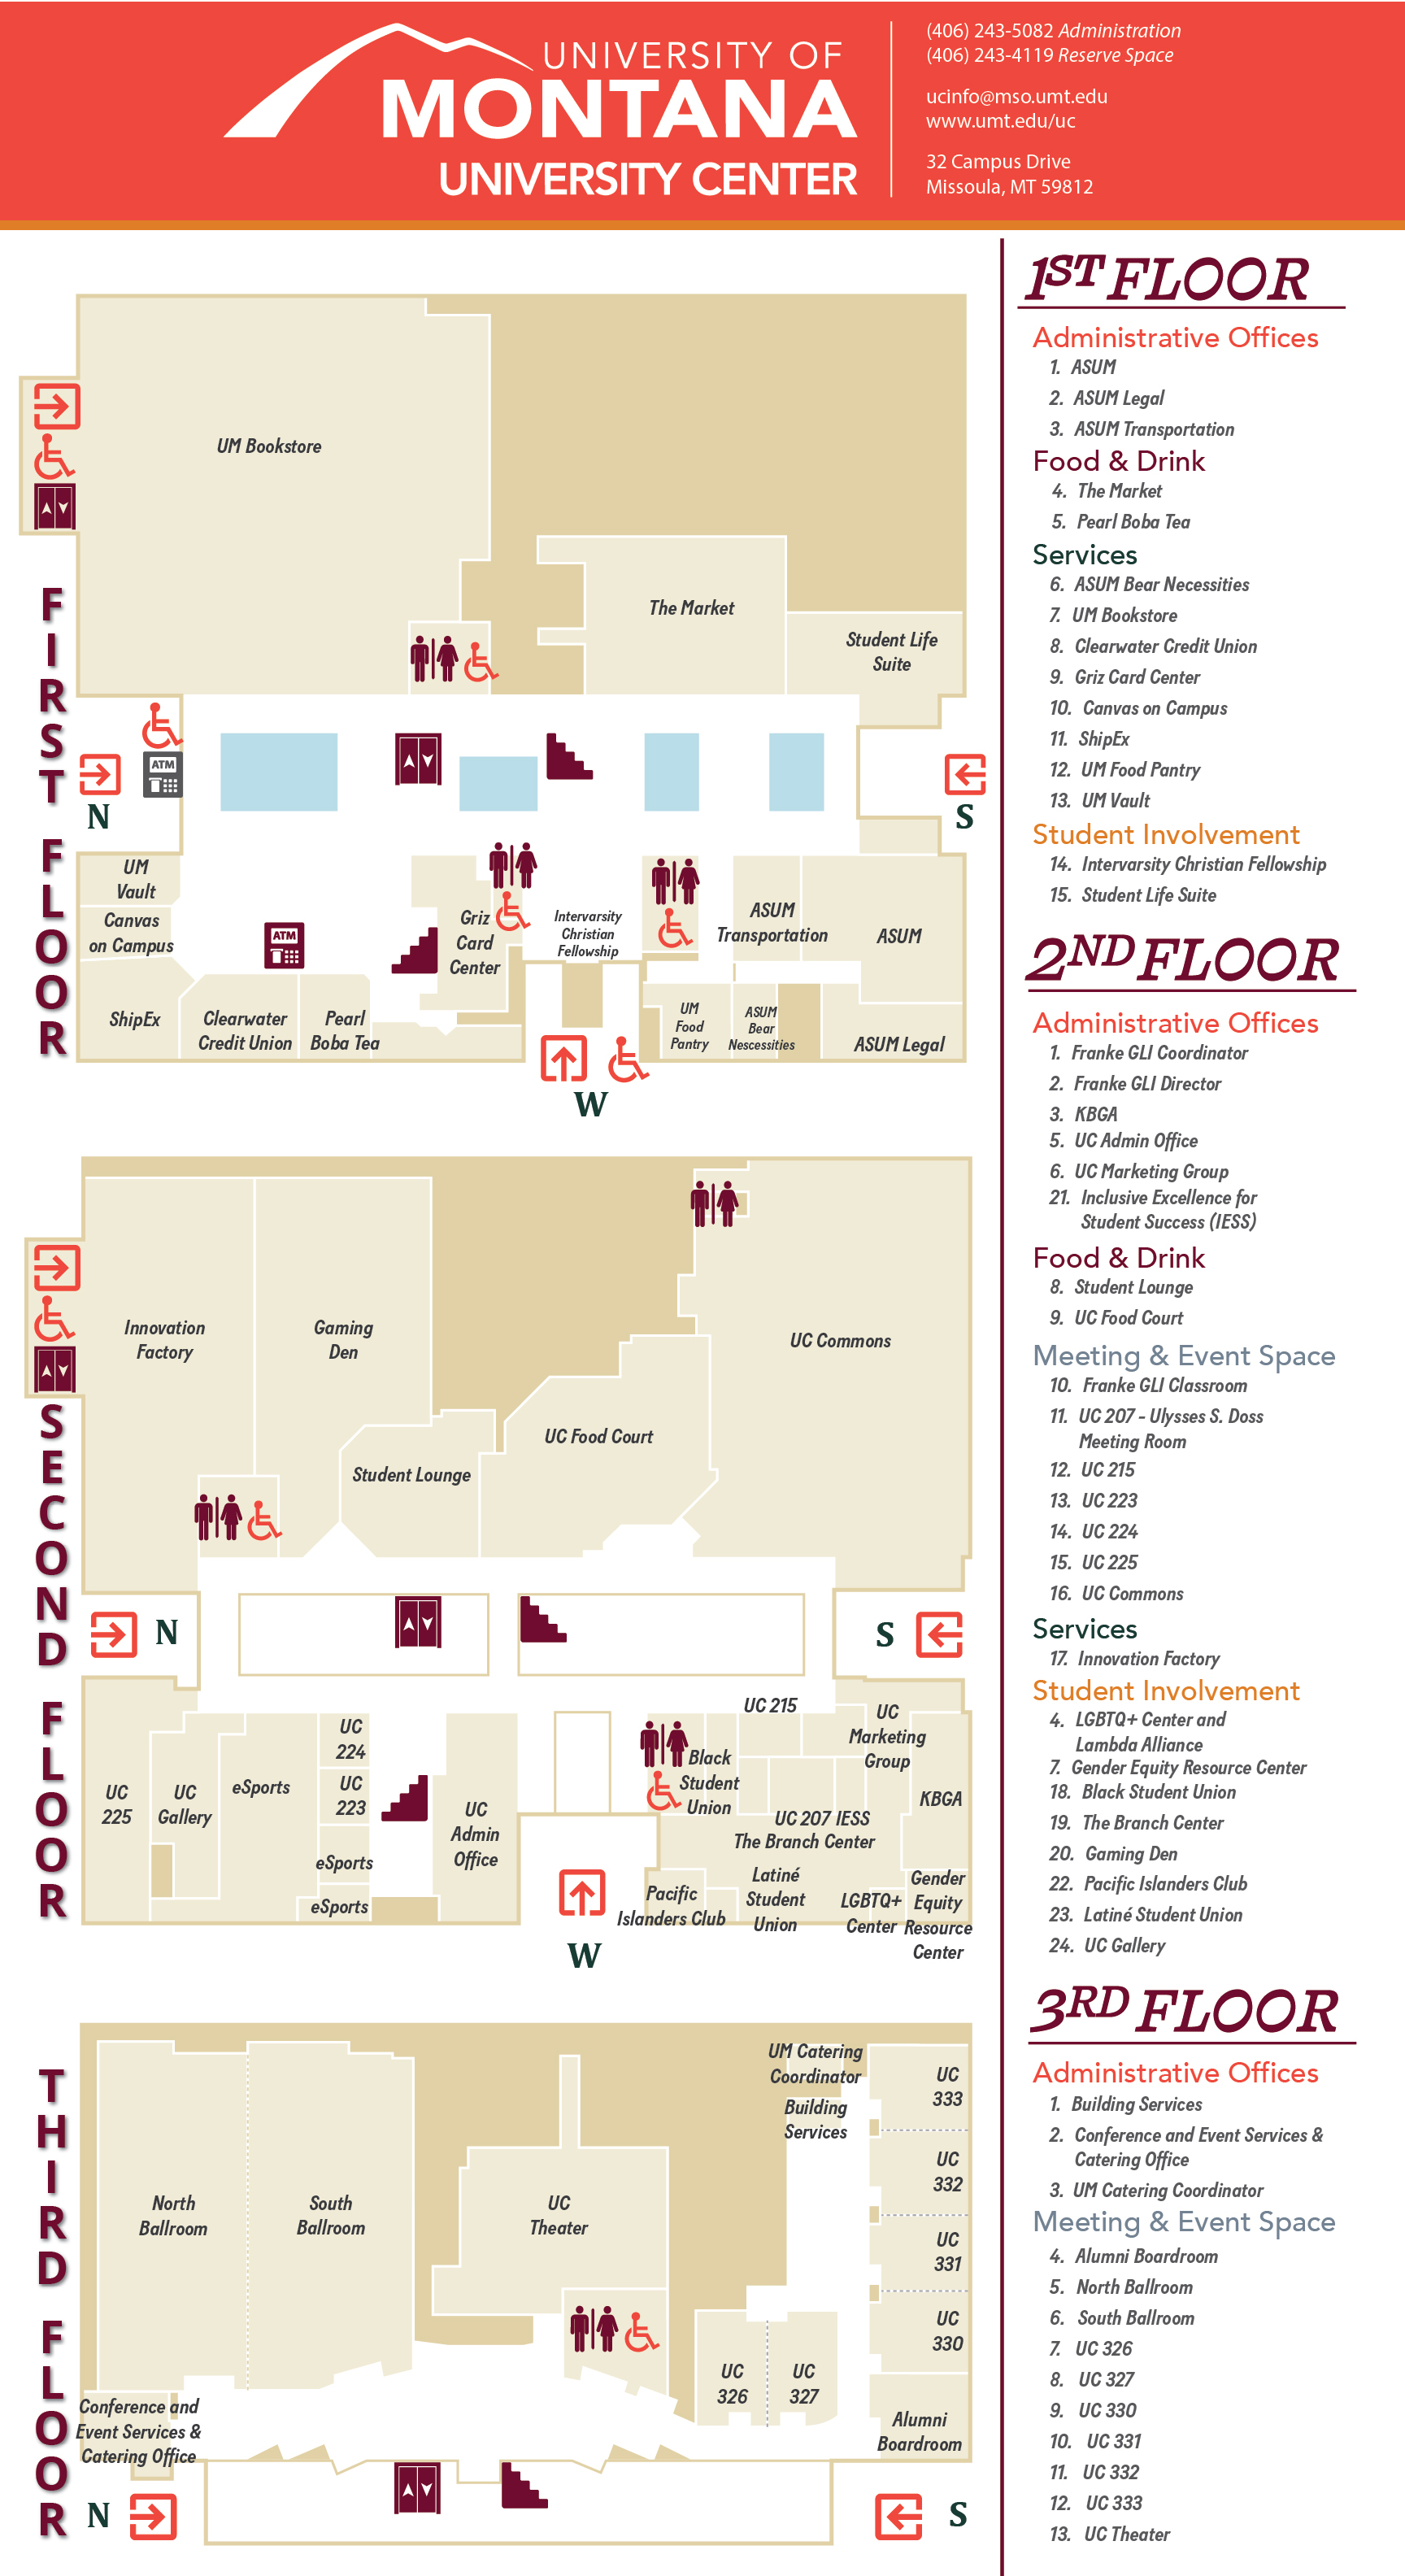 Map of the first floor of the University Center